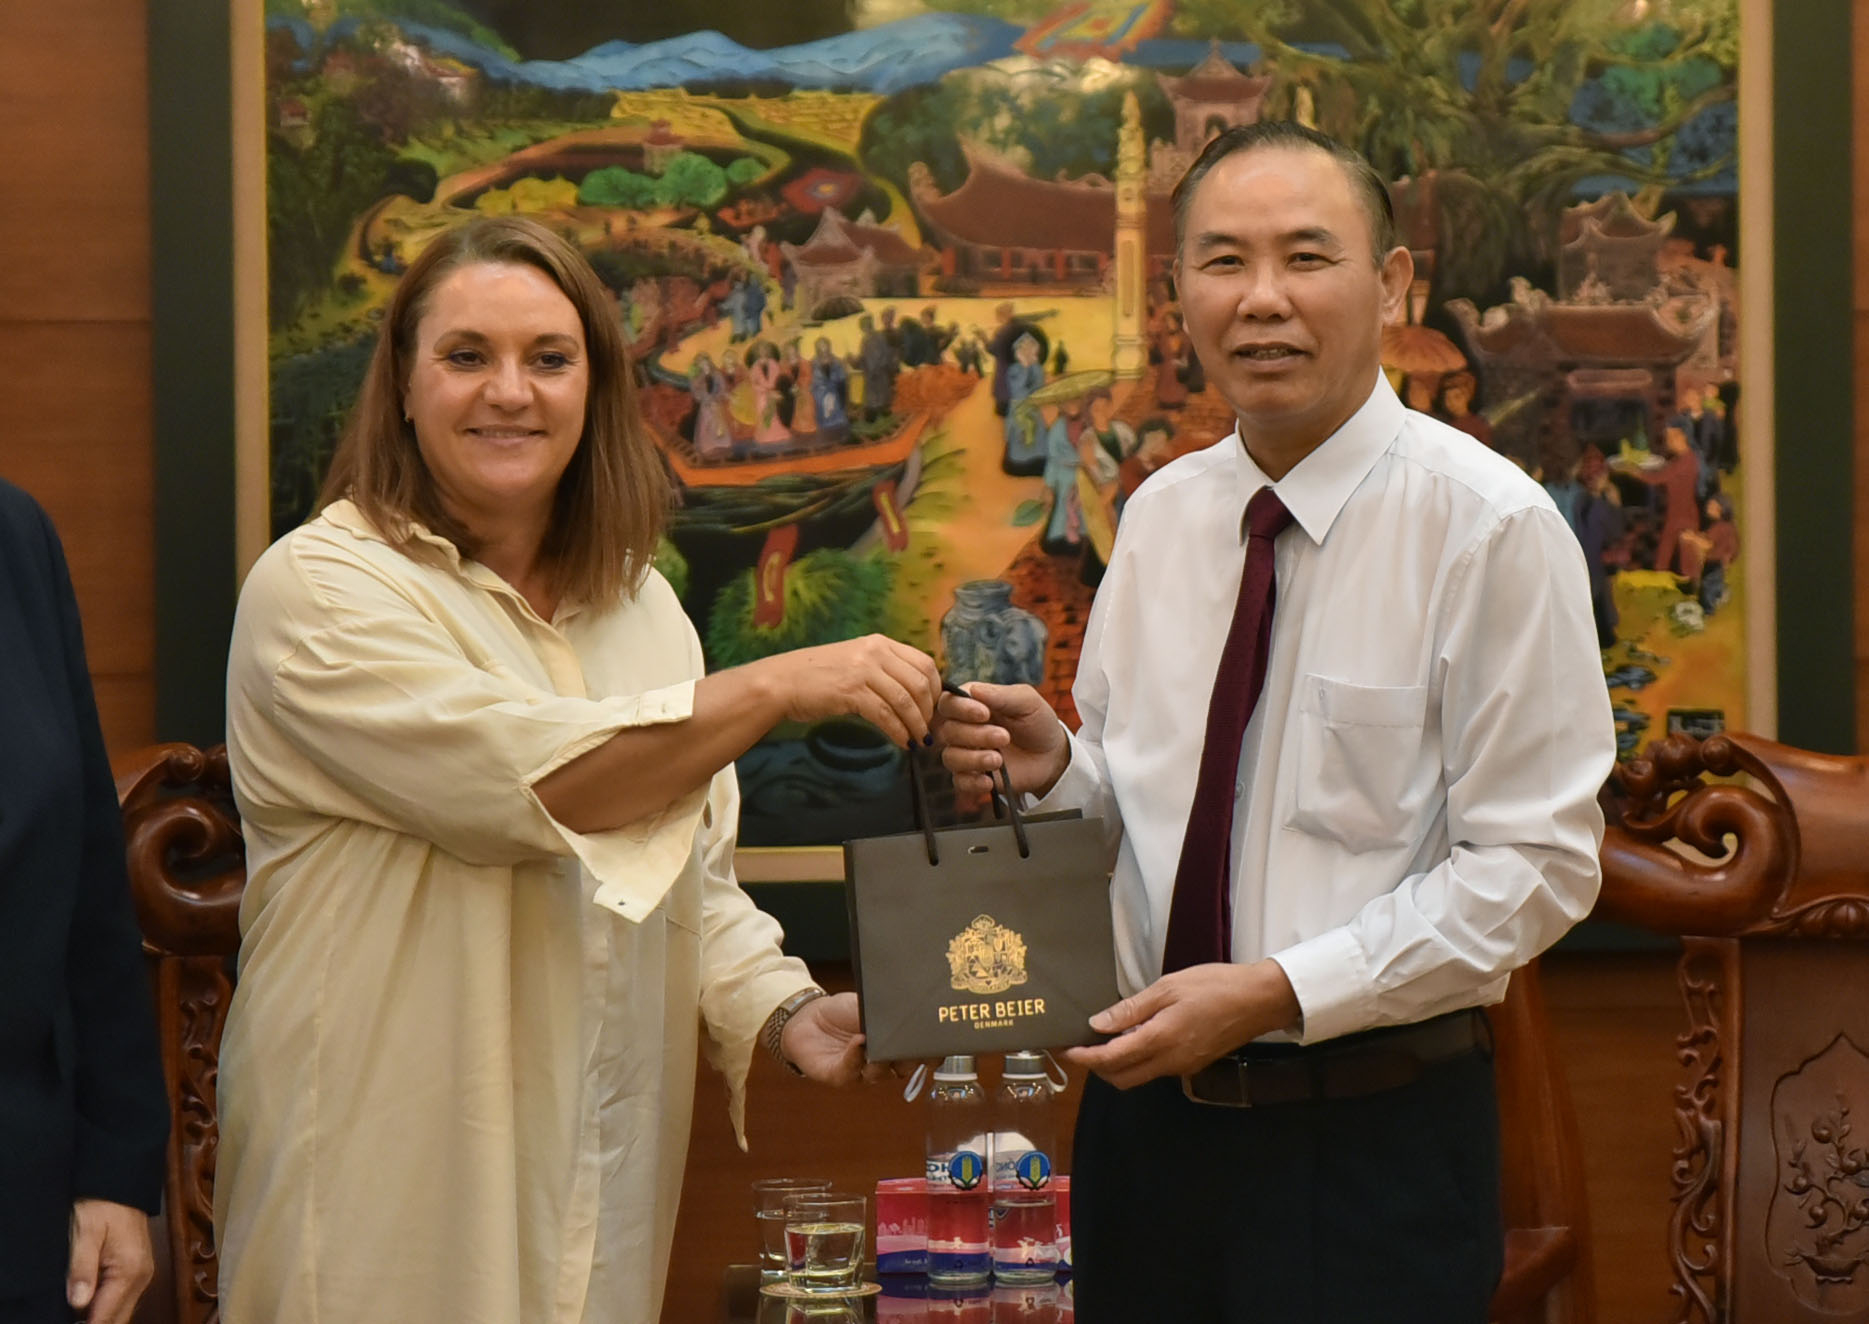 Ms. Mette Ekeroth, Deputy Head of Mission of the Royal Danish Embassy to Vietnam presents a gift to Deputy Minister Phung Duc Tien.